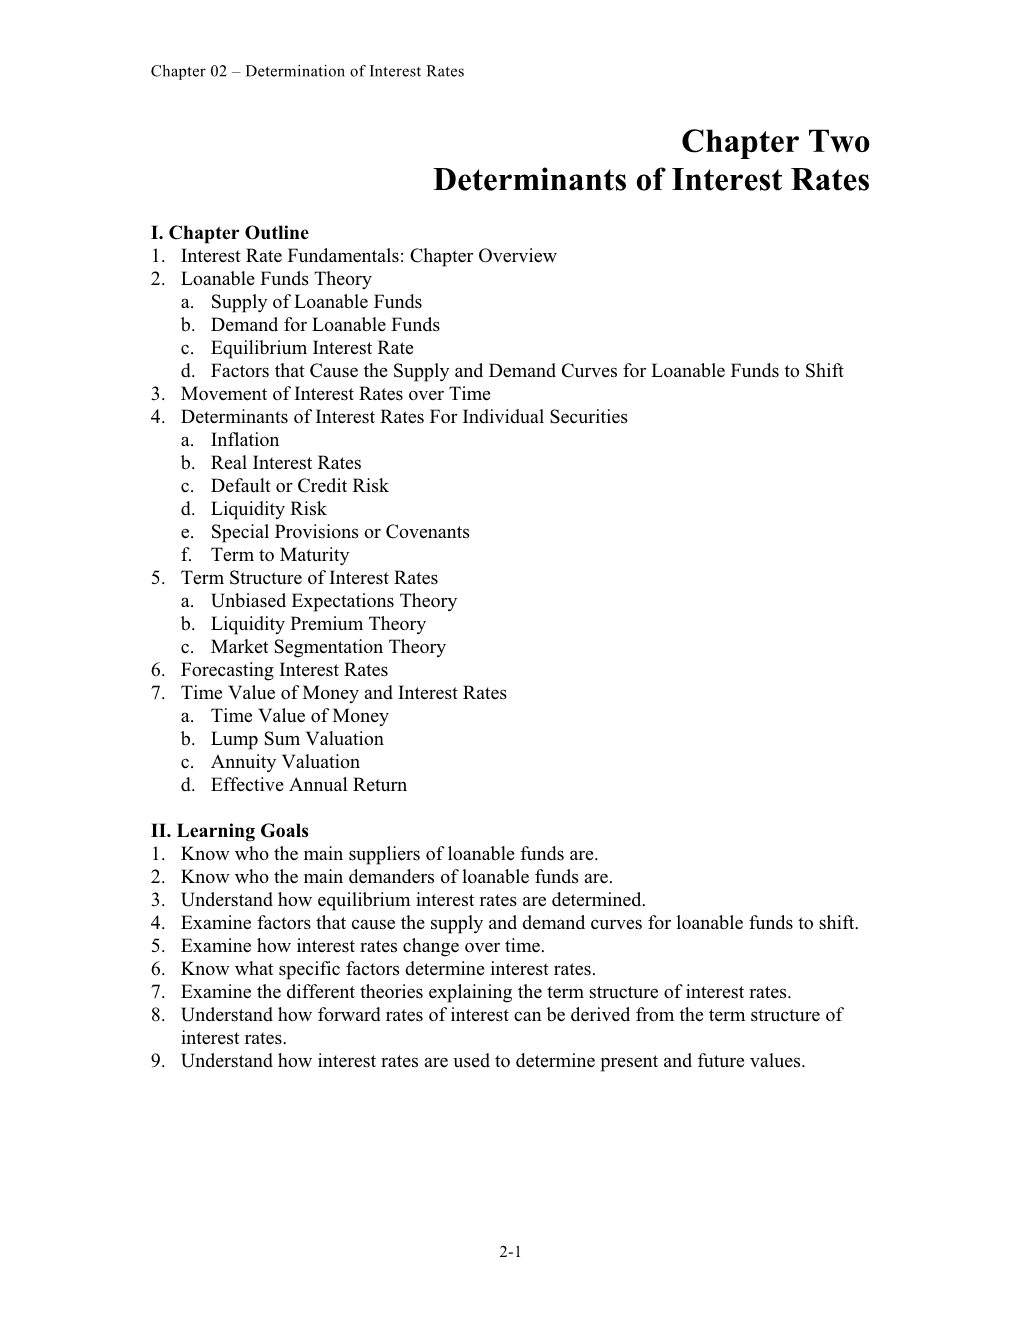 Chapter 02 Determination of Interest Rates